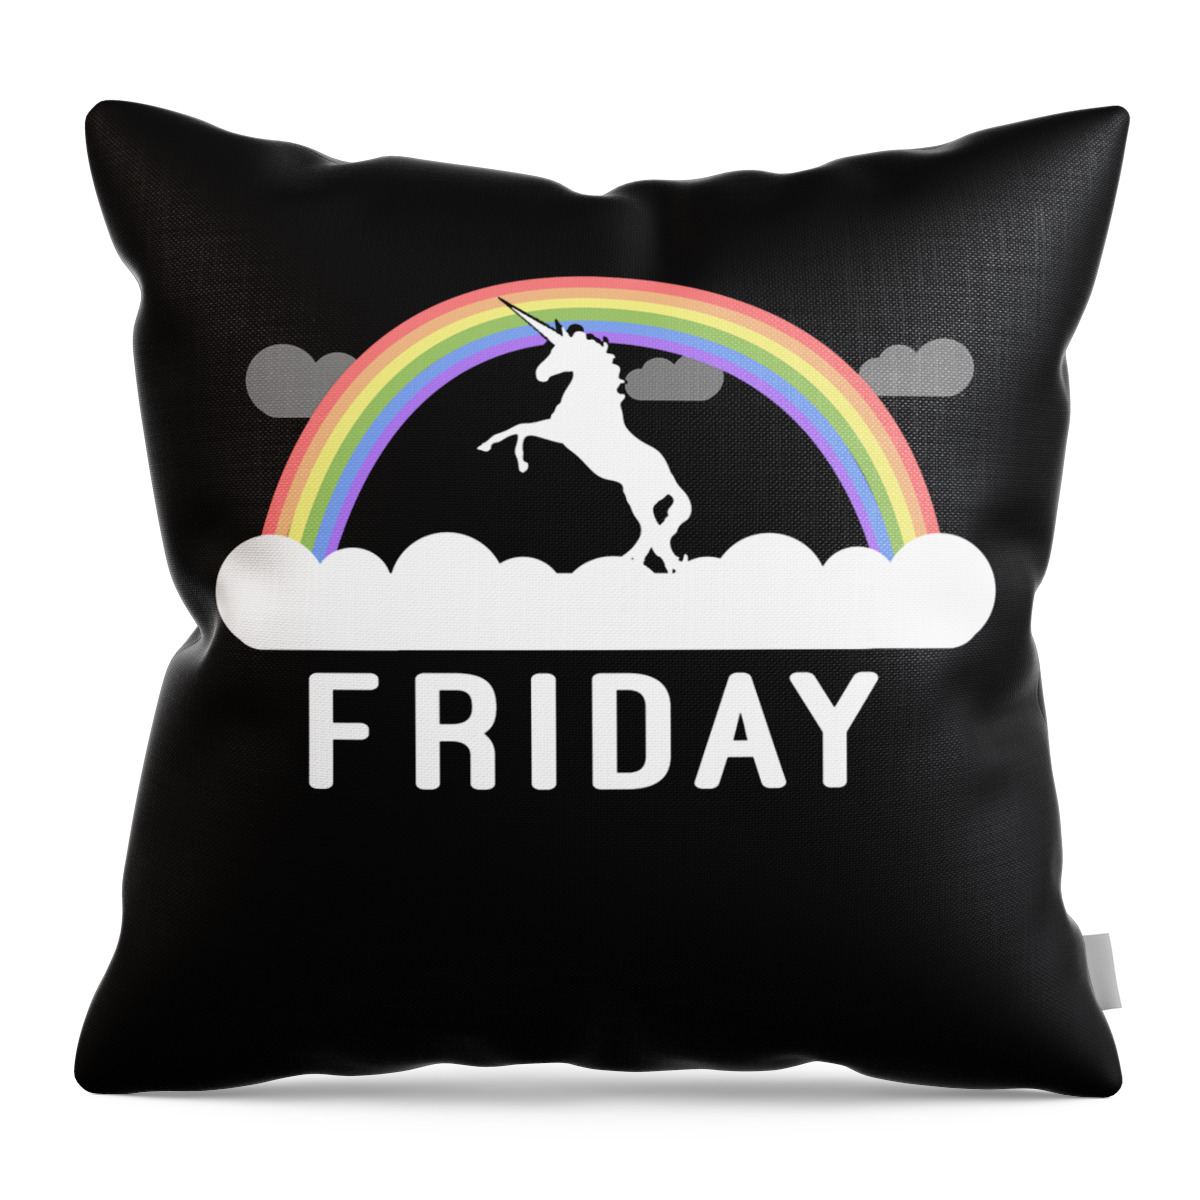 Funny Throw Pillow featuring the digital art Friday by Flippin Sweet Gear